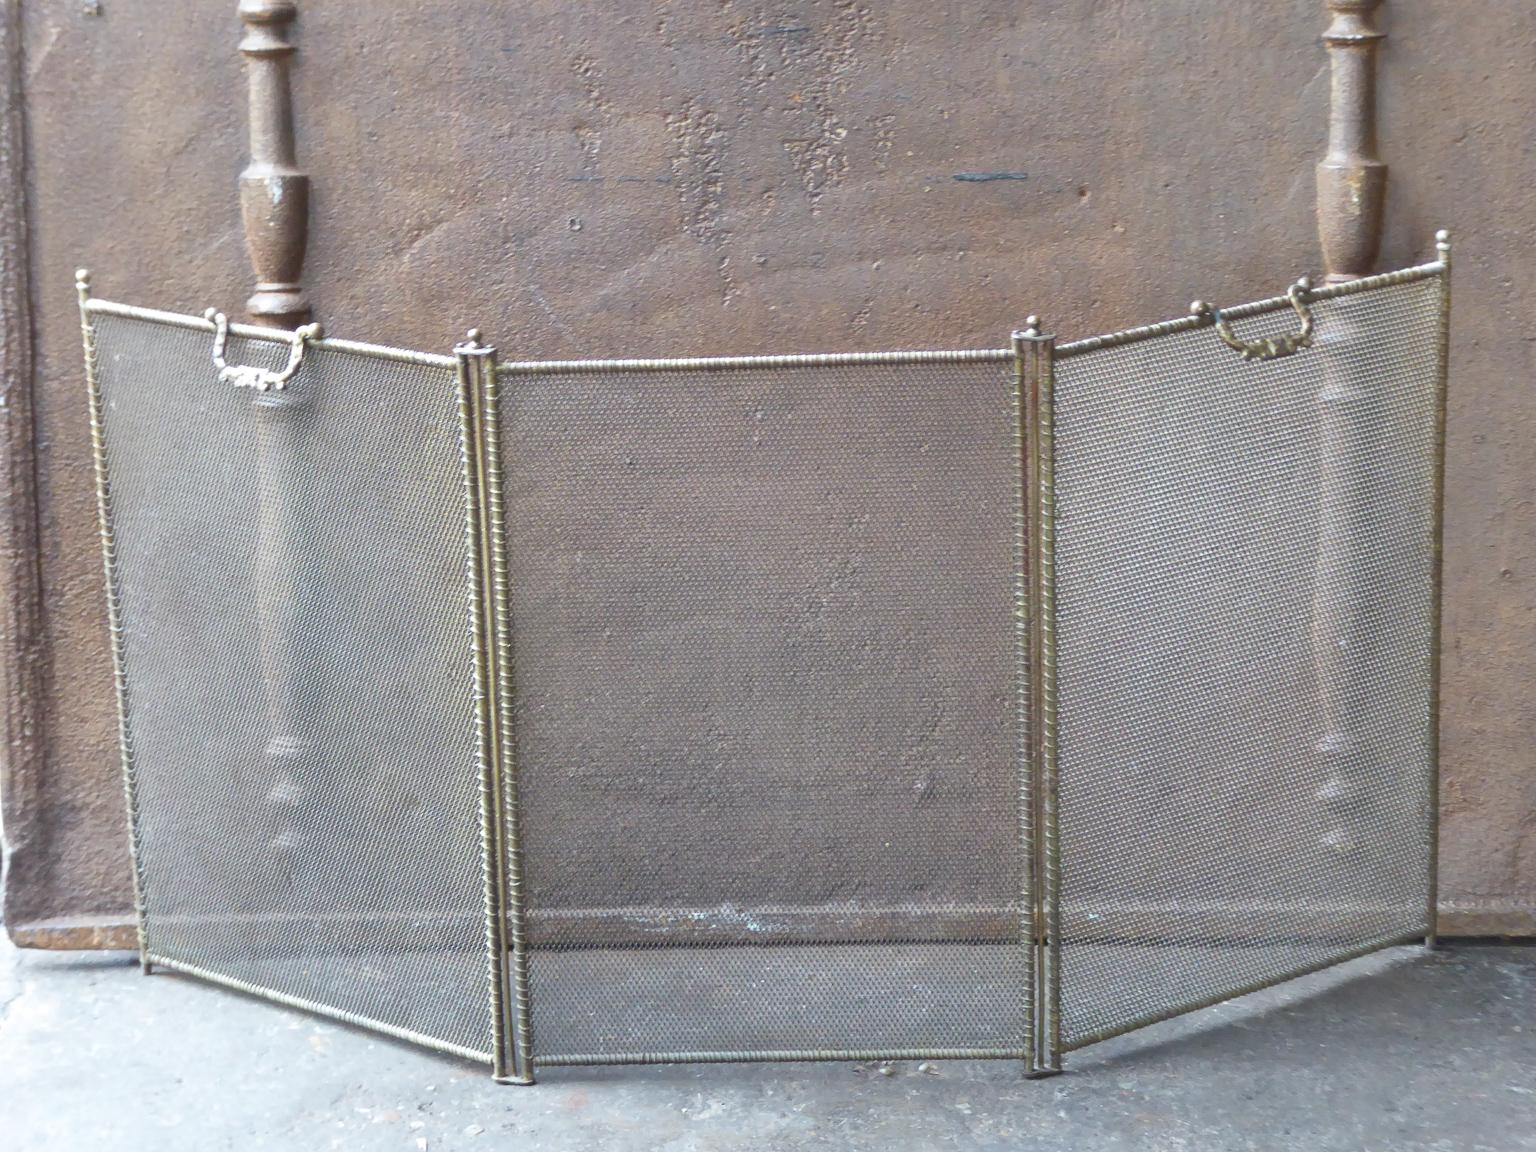 19th century French Napoleon III three-panel fireplace screen. The screen is made of brass, iron and iron mesh. It is in a good condition and is fit for use in front of the fireplace.